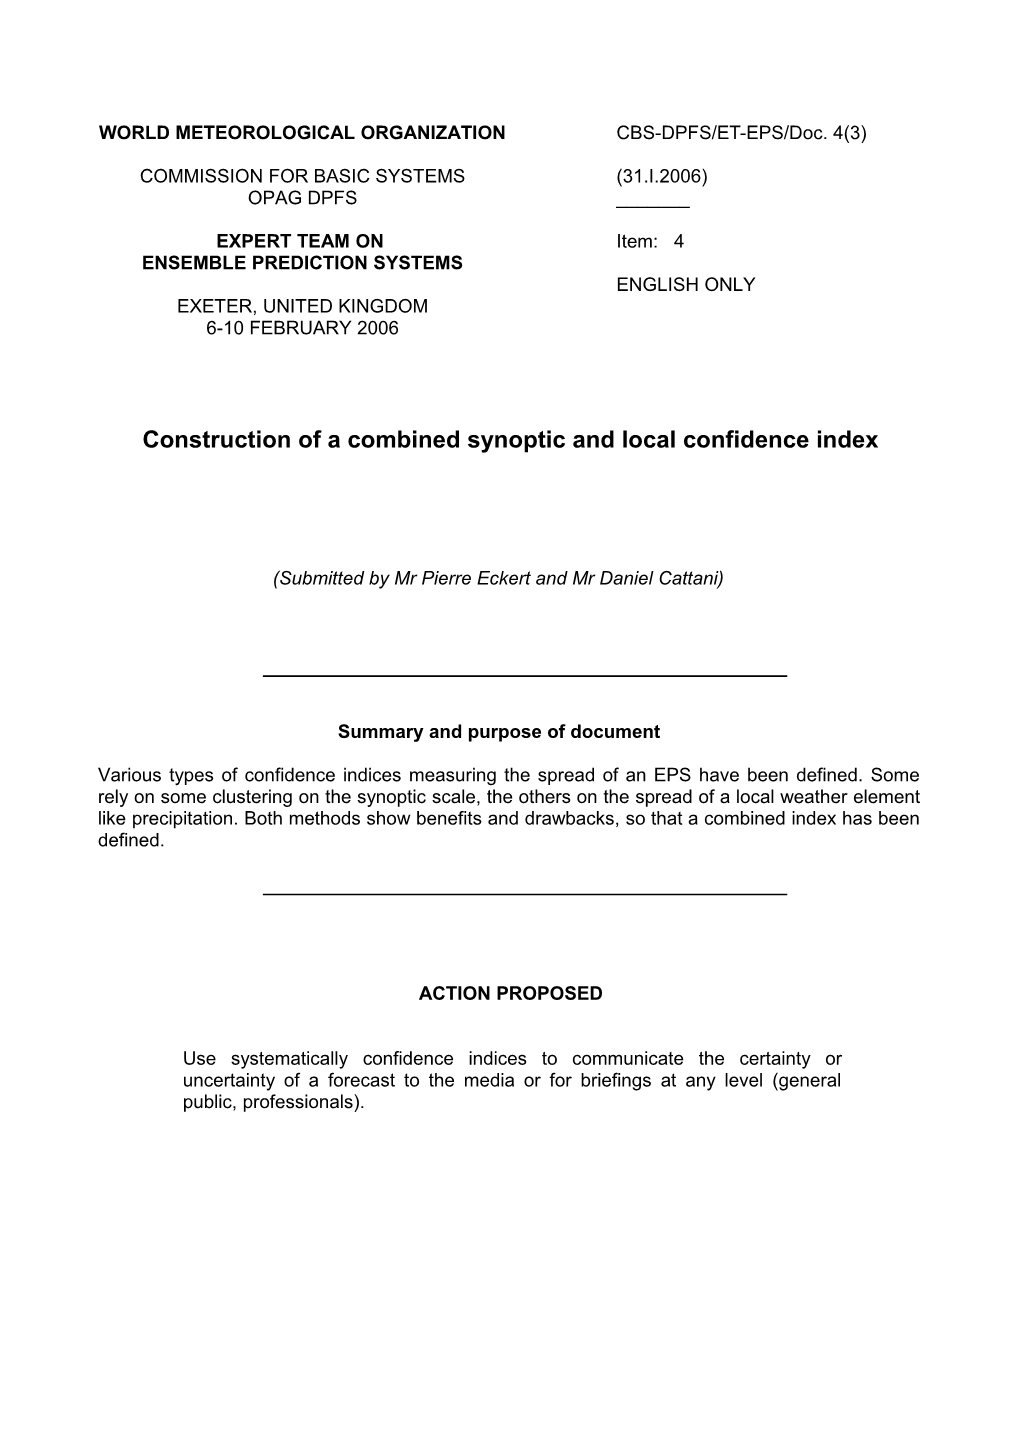 Construction of a Combined Synoptic and Local Confidence Index